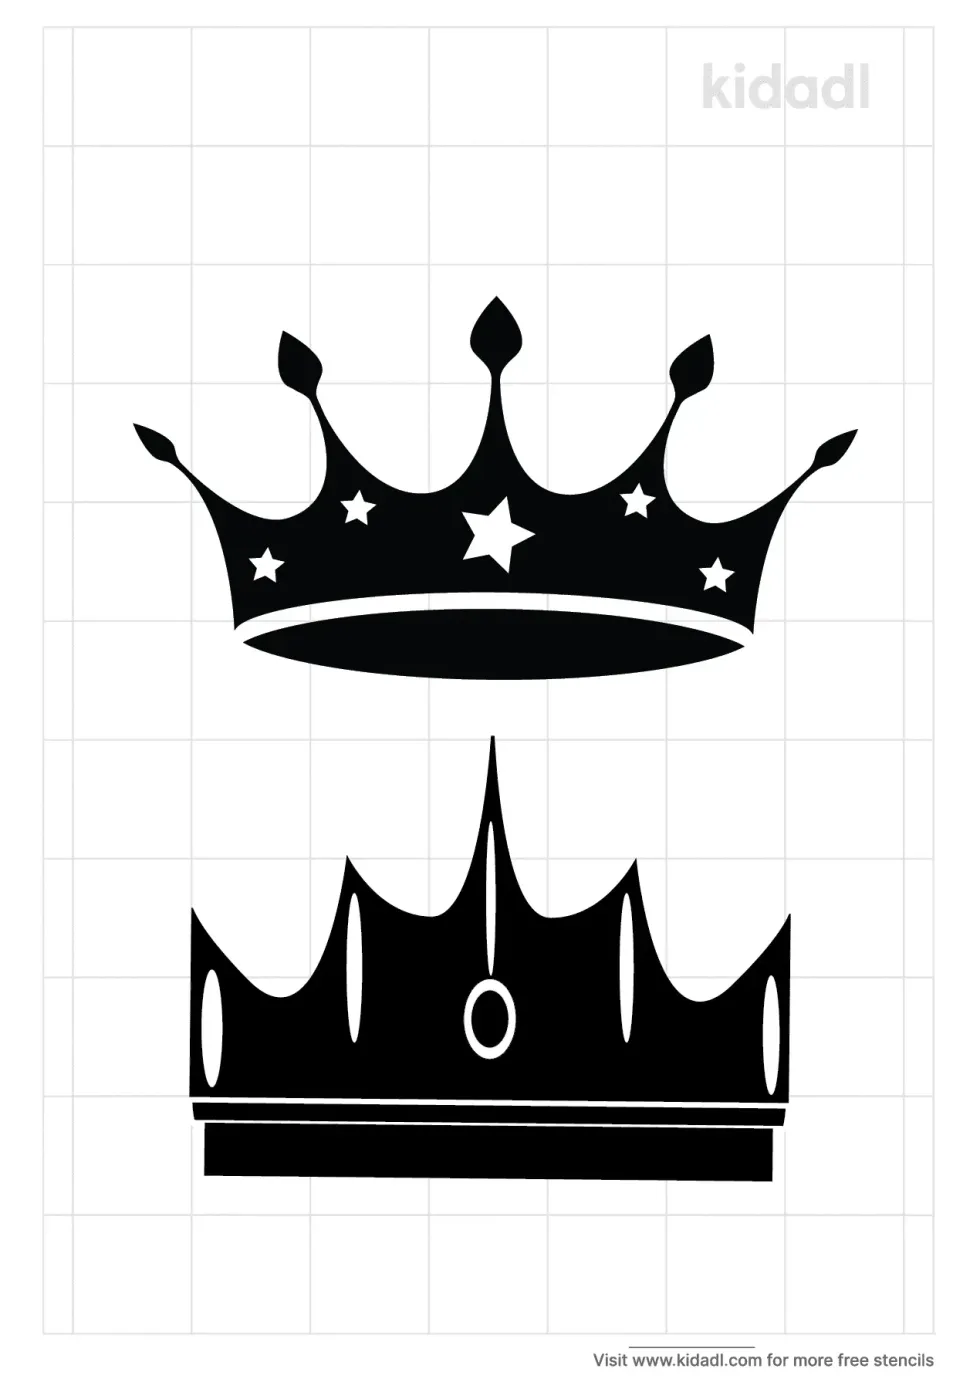 King And Queen Crowns